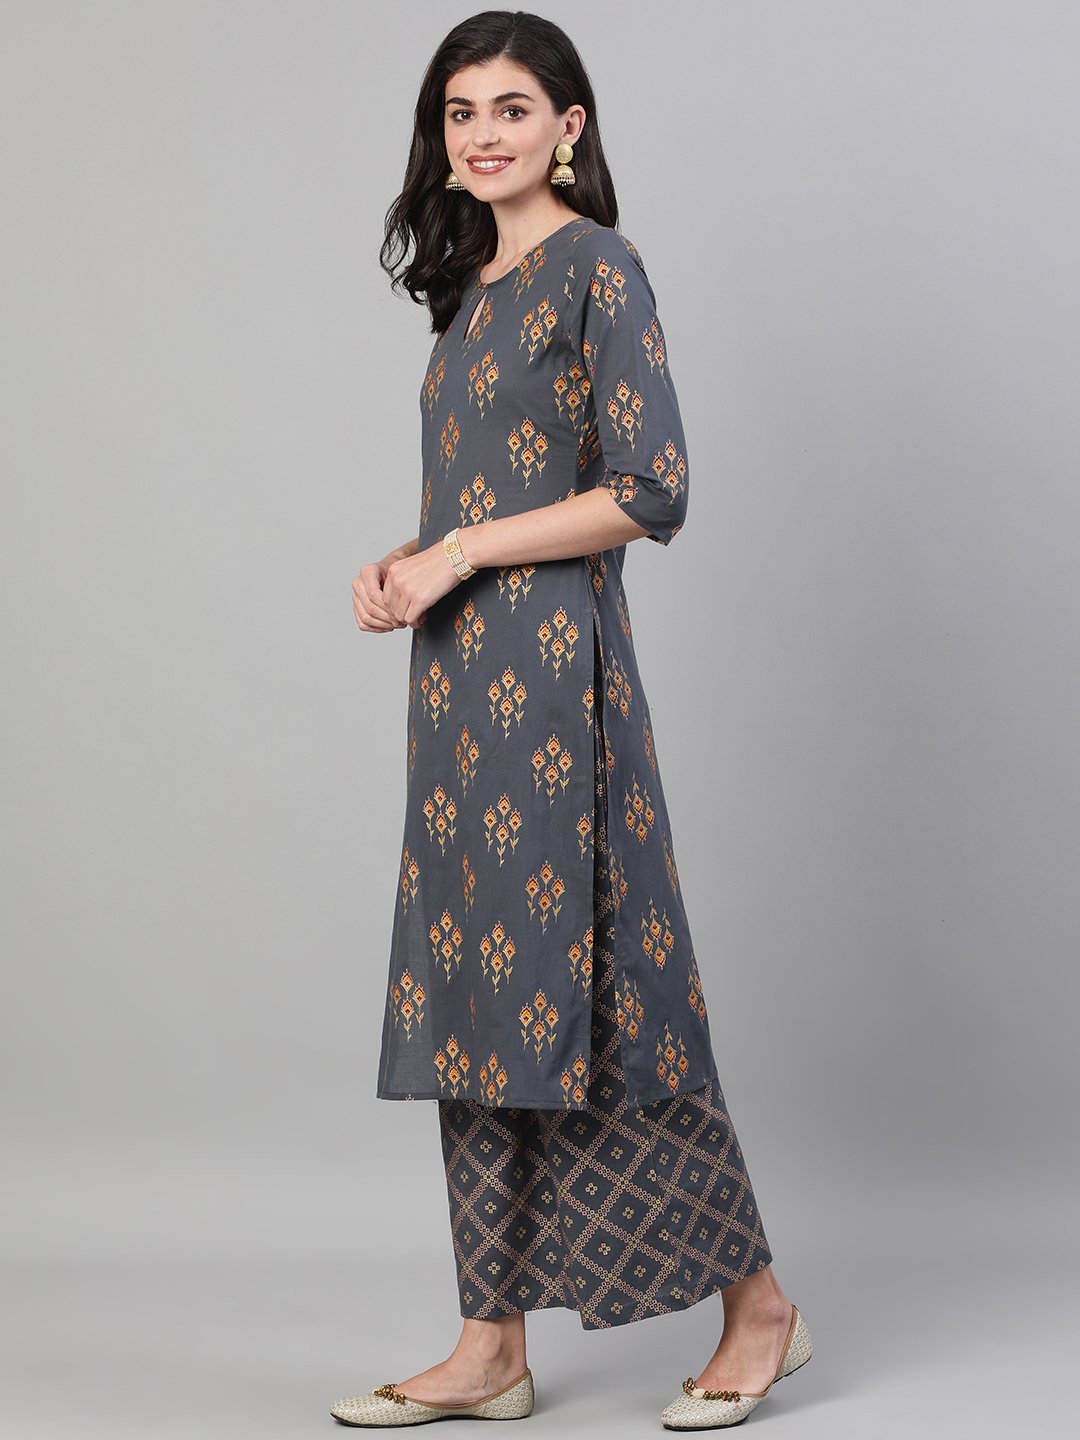 Women's Steel Grey  Gold Printed Three-Quarter Sleeves Straight Kurta With Palazzo and Dupatta with pockets And Face Mask - Nayo Clothing